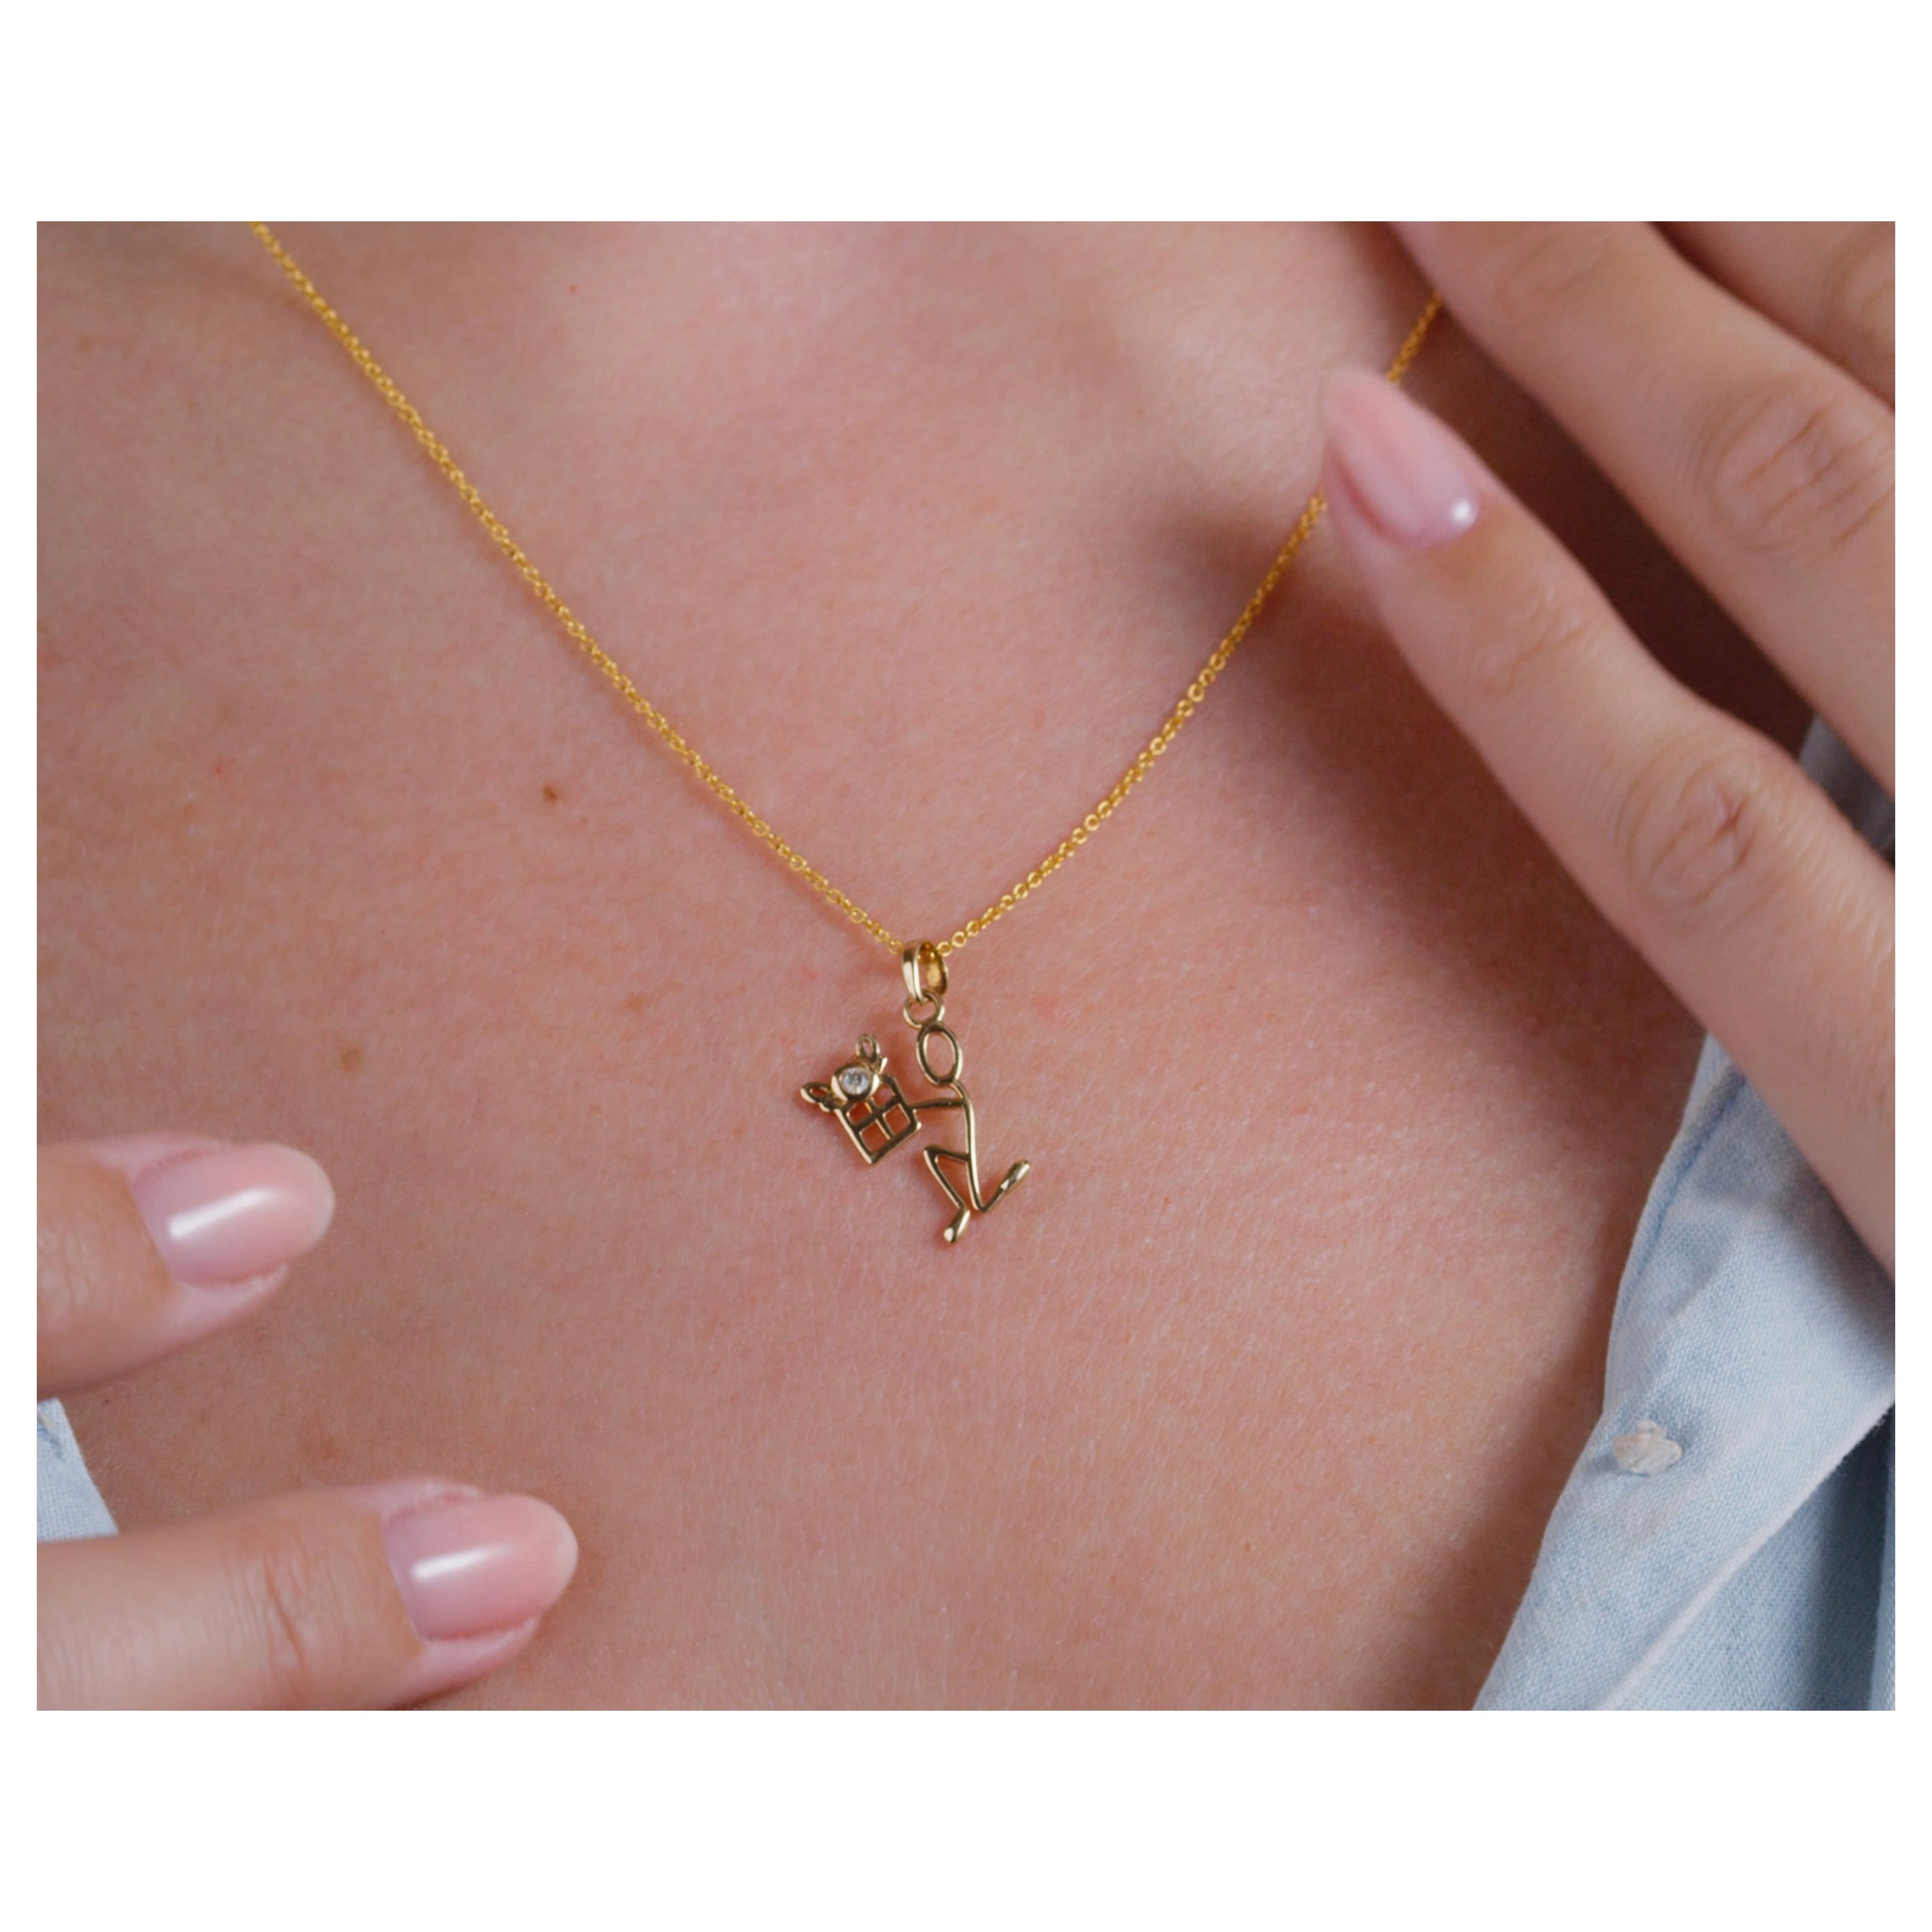 0.05 Carat Diamond Yellow Gold Stick Figure Presenting Gift Pendant Necklace For Sale